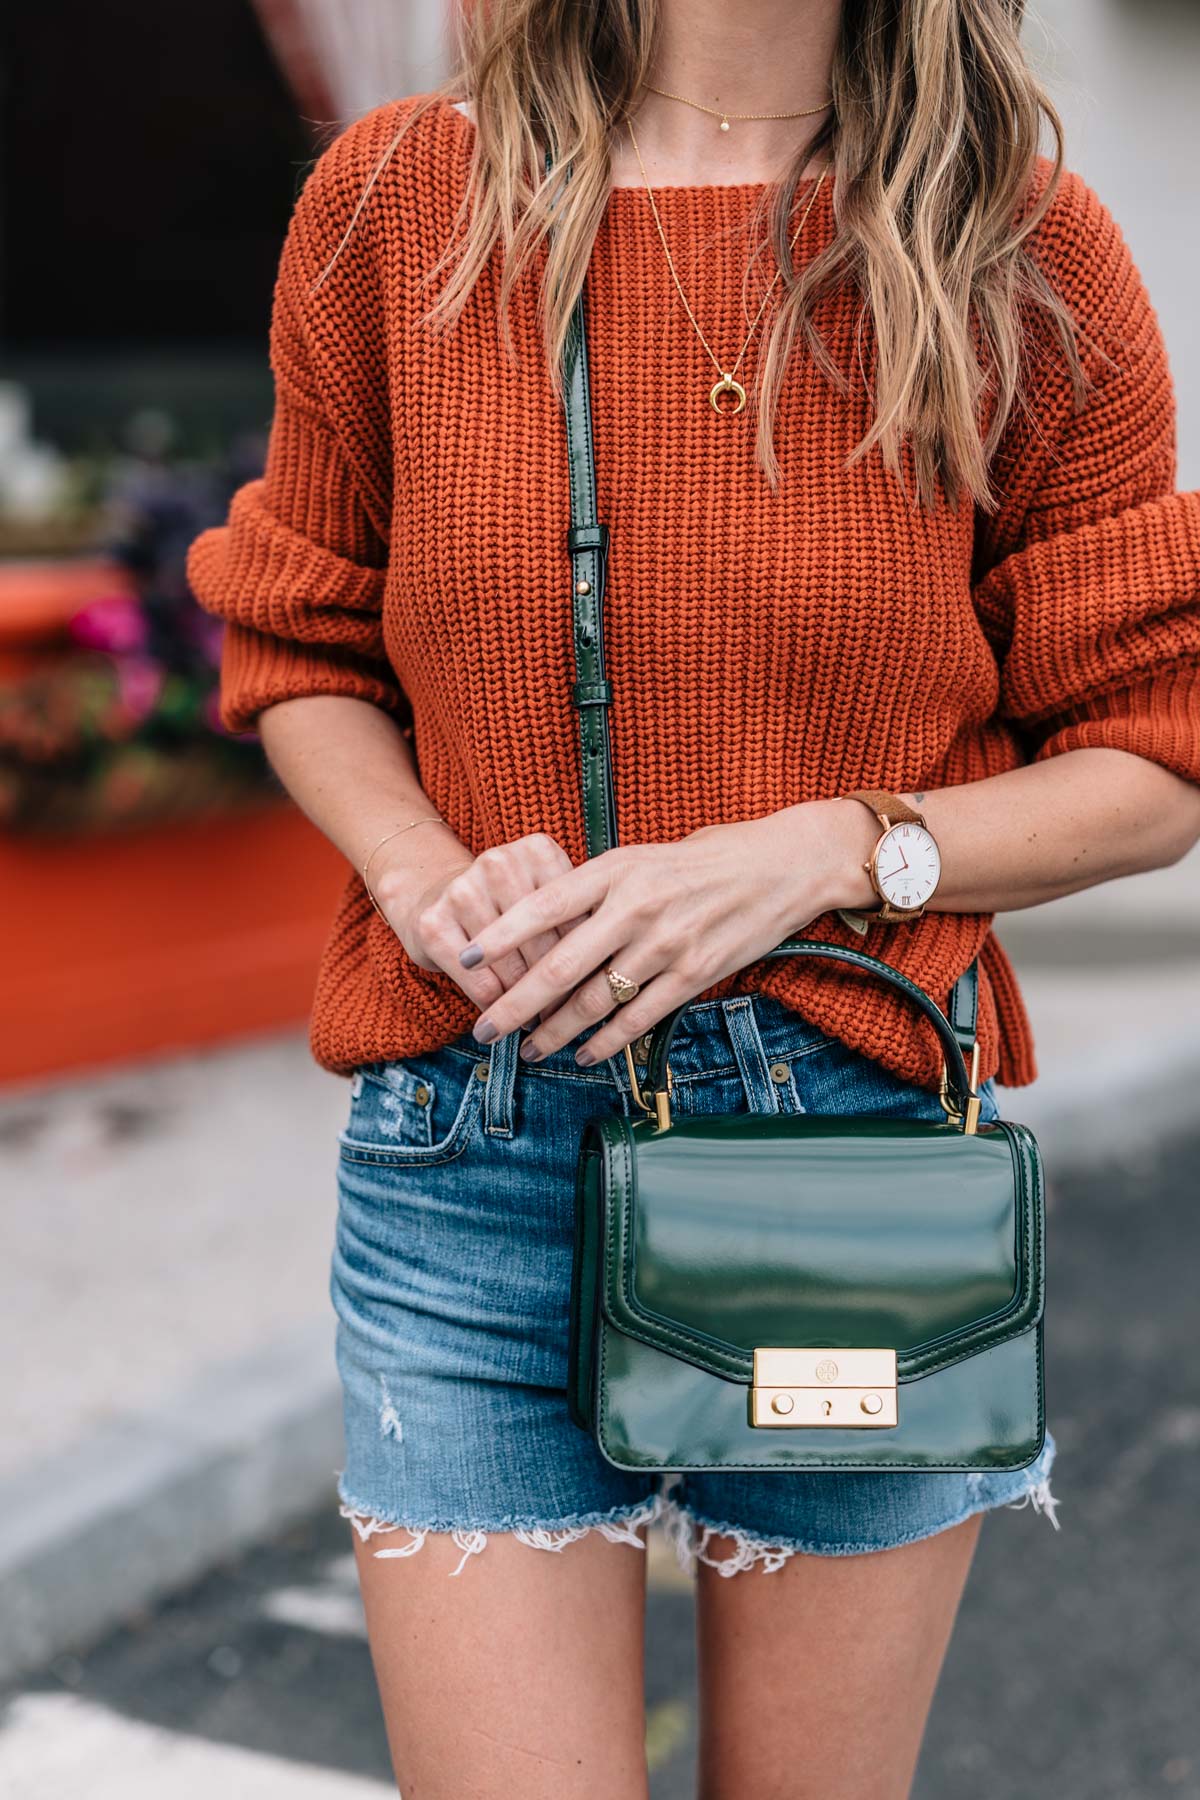 Jess Ann Kirby styles the fall color trend autumn maple in a chunky knit sweater with the tory burch juliette mini satchel